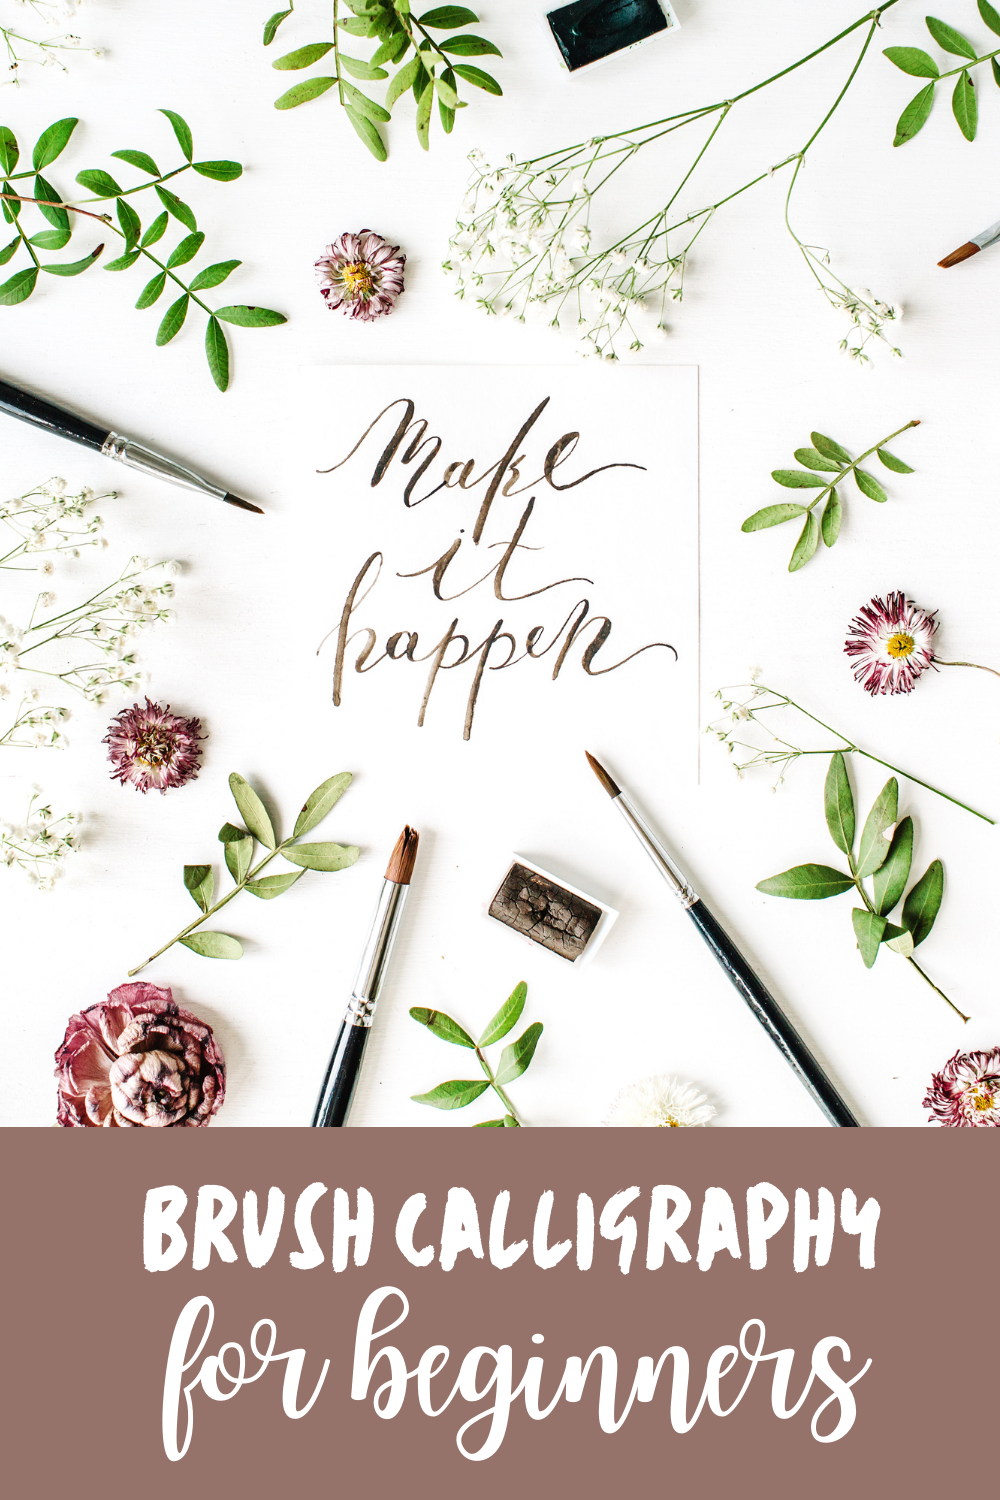 A photograph of beautiful brush calligraphy that says Make it Happen - the text reads Brush Calligraphy for Beginners